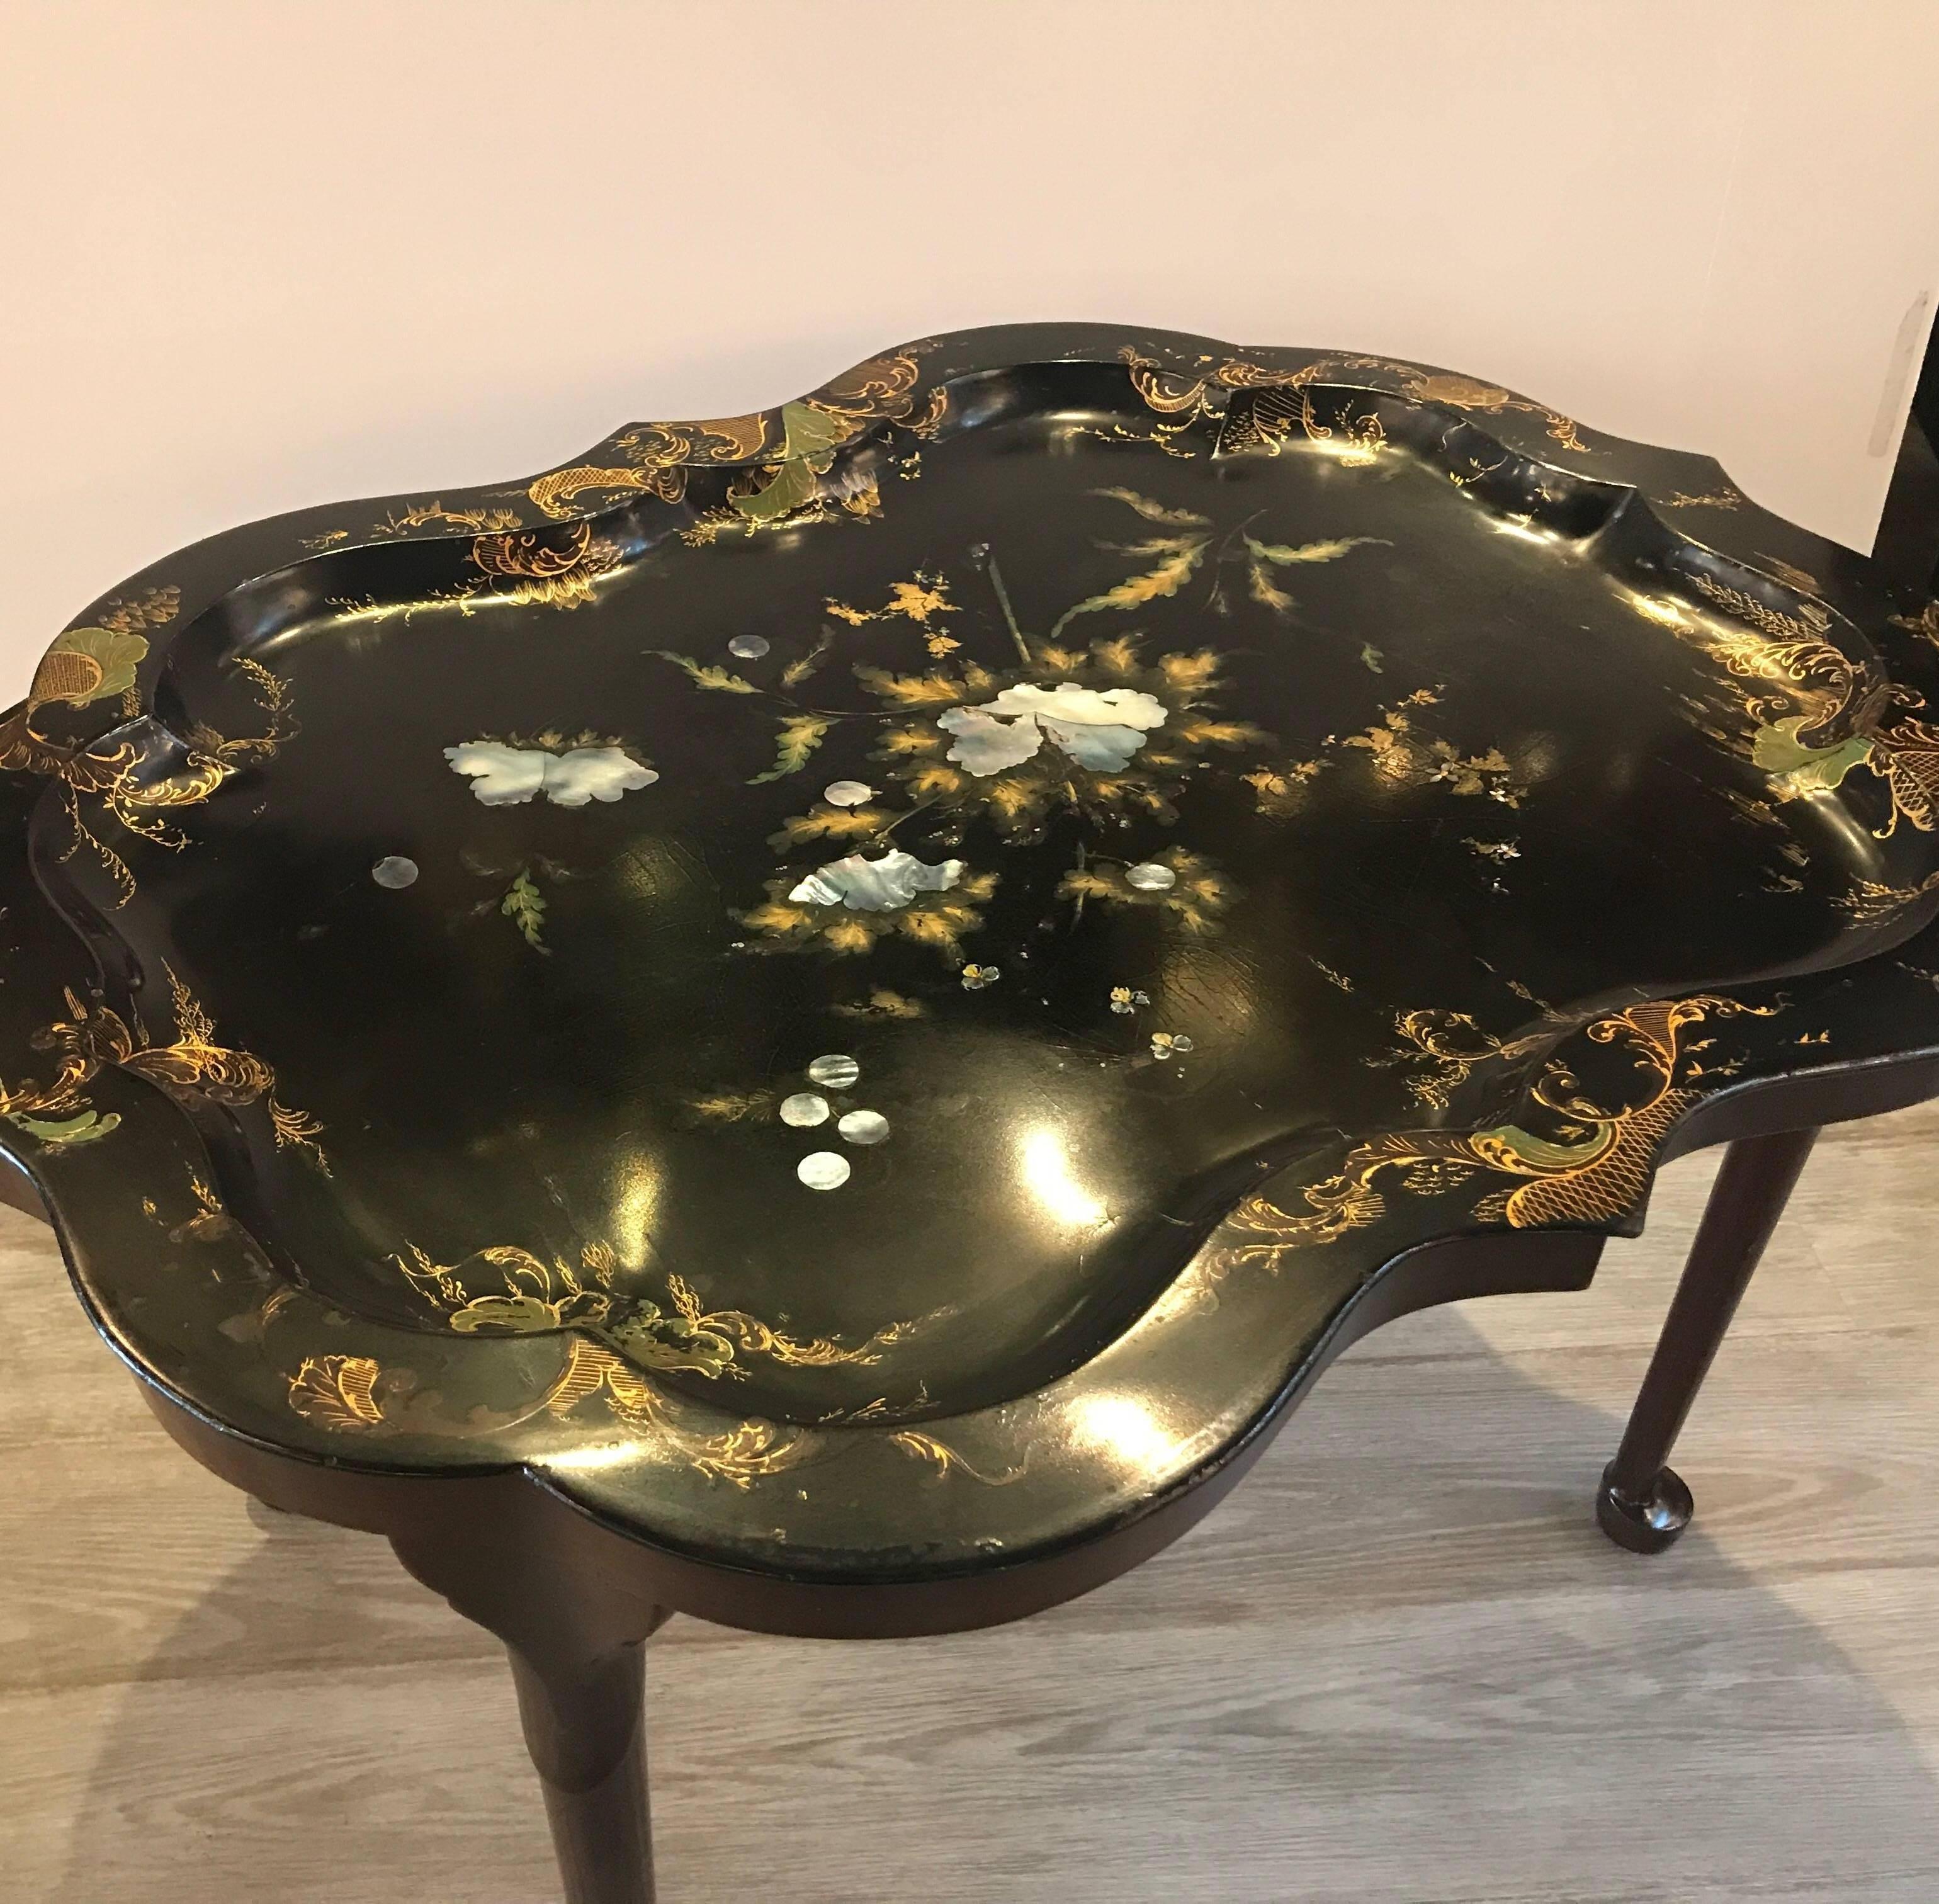 An English tole ware tray table with mother of pearl inlay. The black background with hand painted and gilt decoration with mother of pearl inlay in a floral design. The custom made mahogany base with tapering legs resting on spoon feet. The tray is